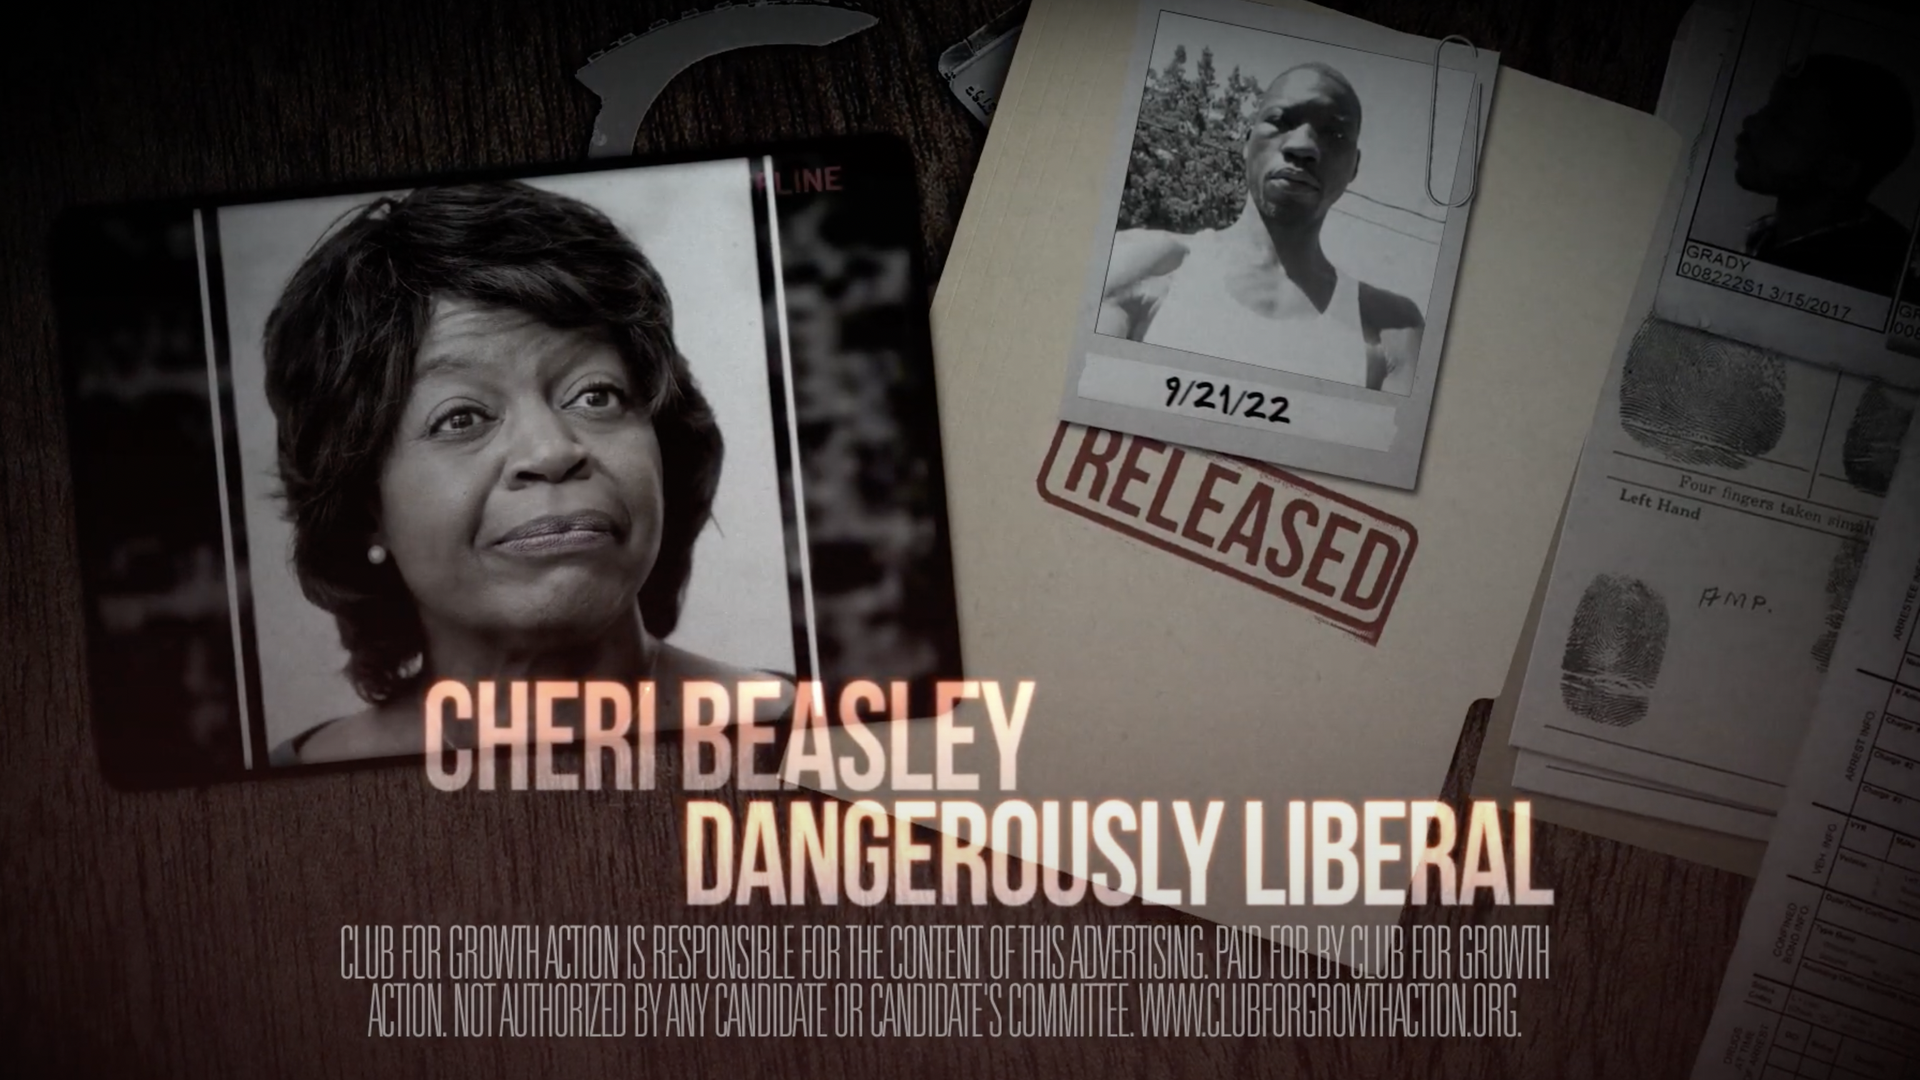 A screengrab of the Cheri Beasley attack add, which reads "Cheri Beasley Dangerously Liberal"